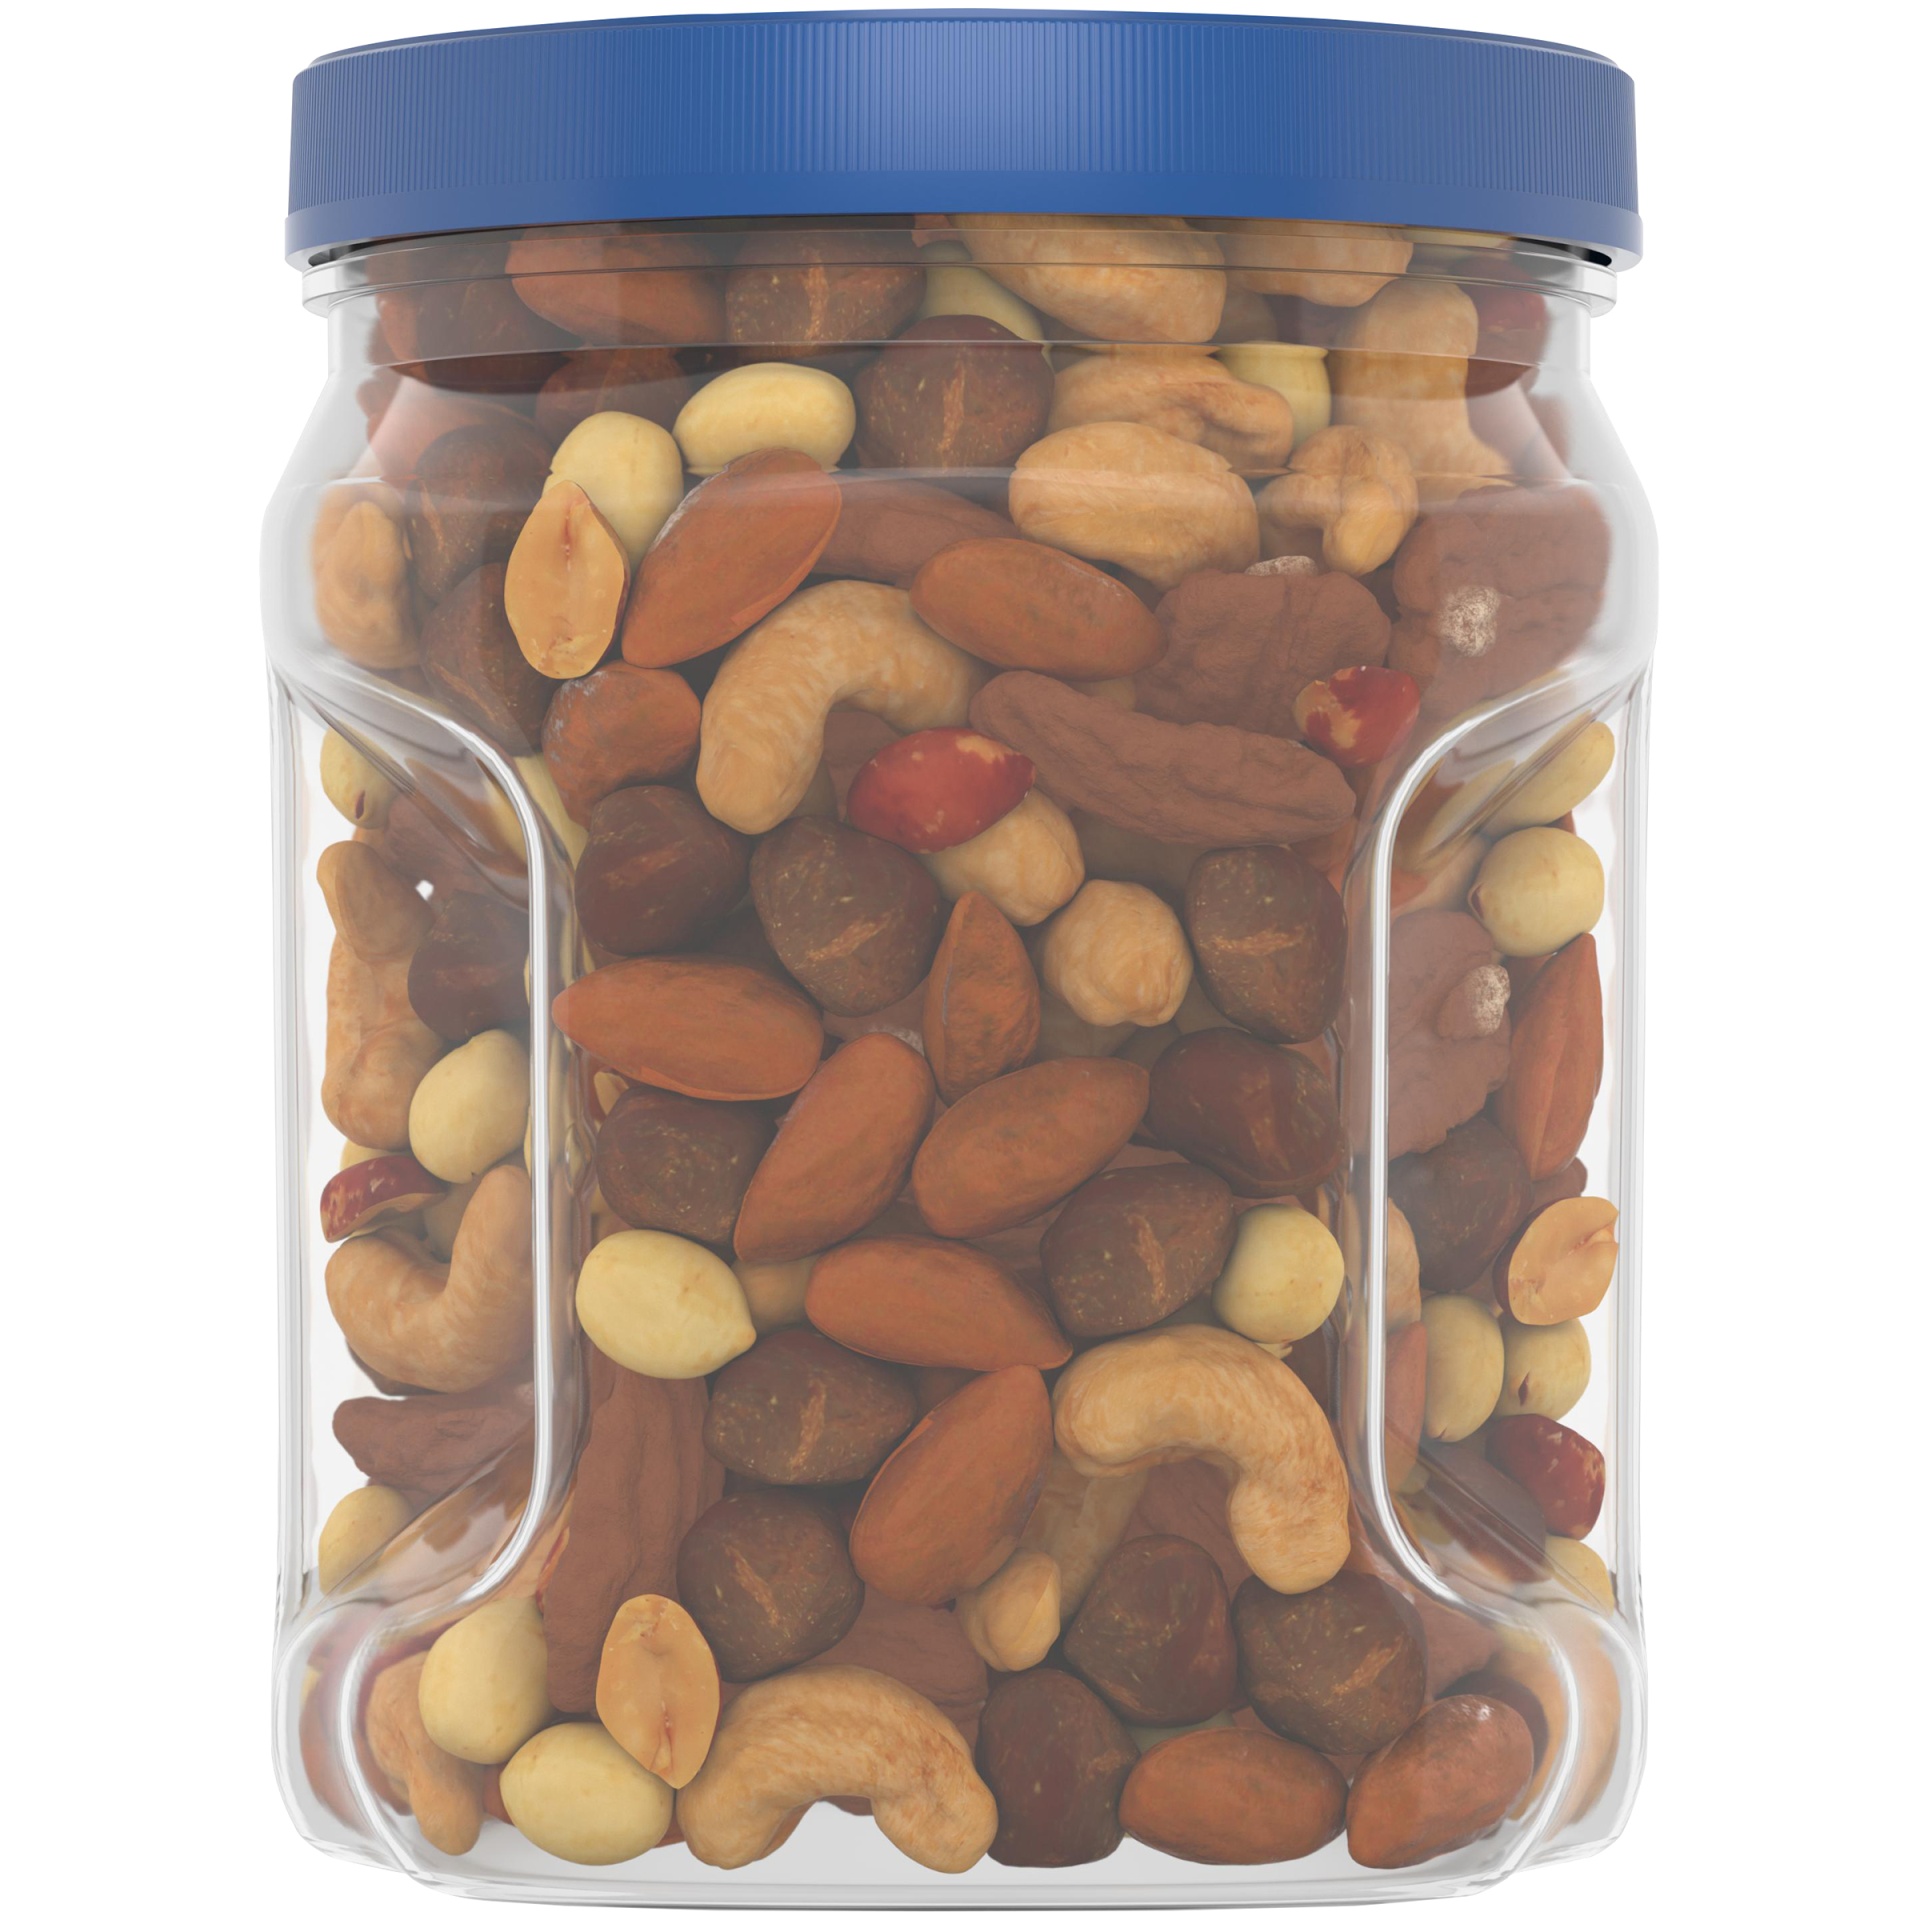 slide 12 of 14, Planters Mixed Nuts Less Than 50% Peanuts with Peanuts, Almonds, Cashews, Pecans & Hazelnuts, 27 oz